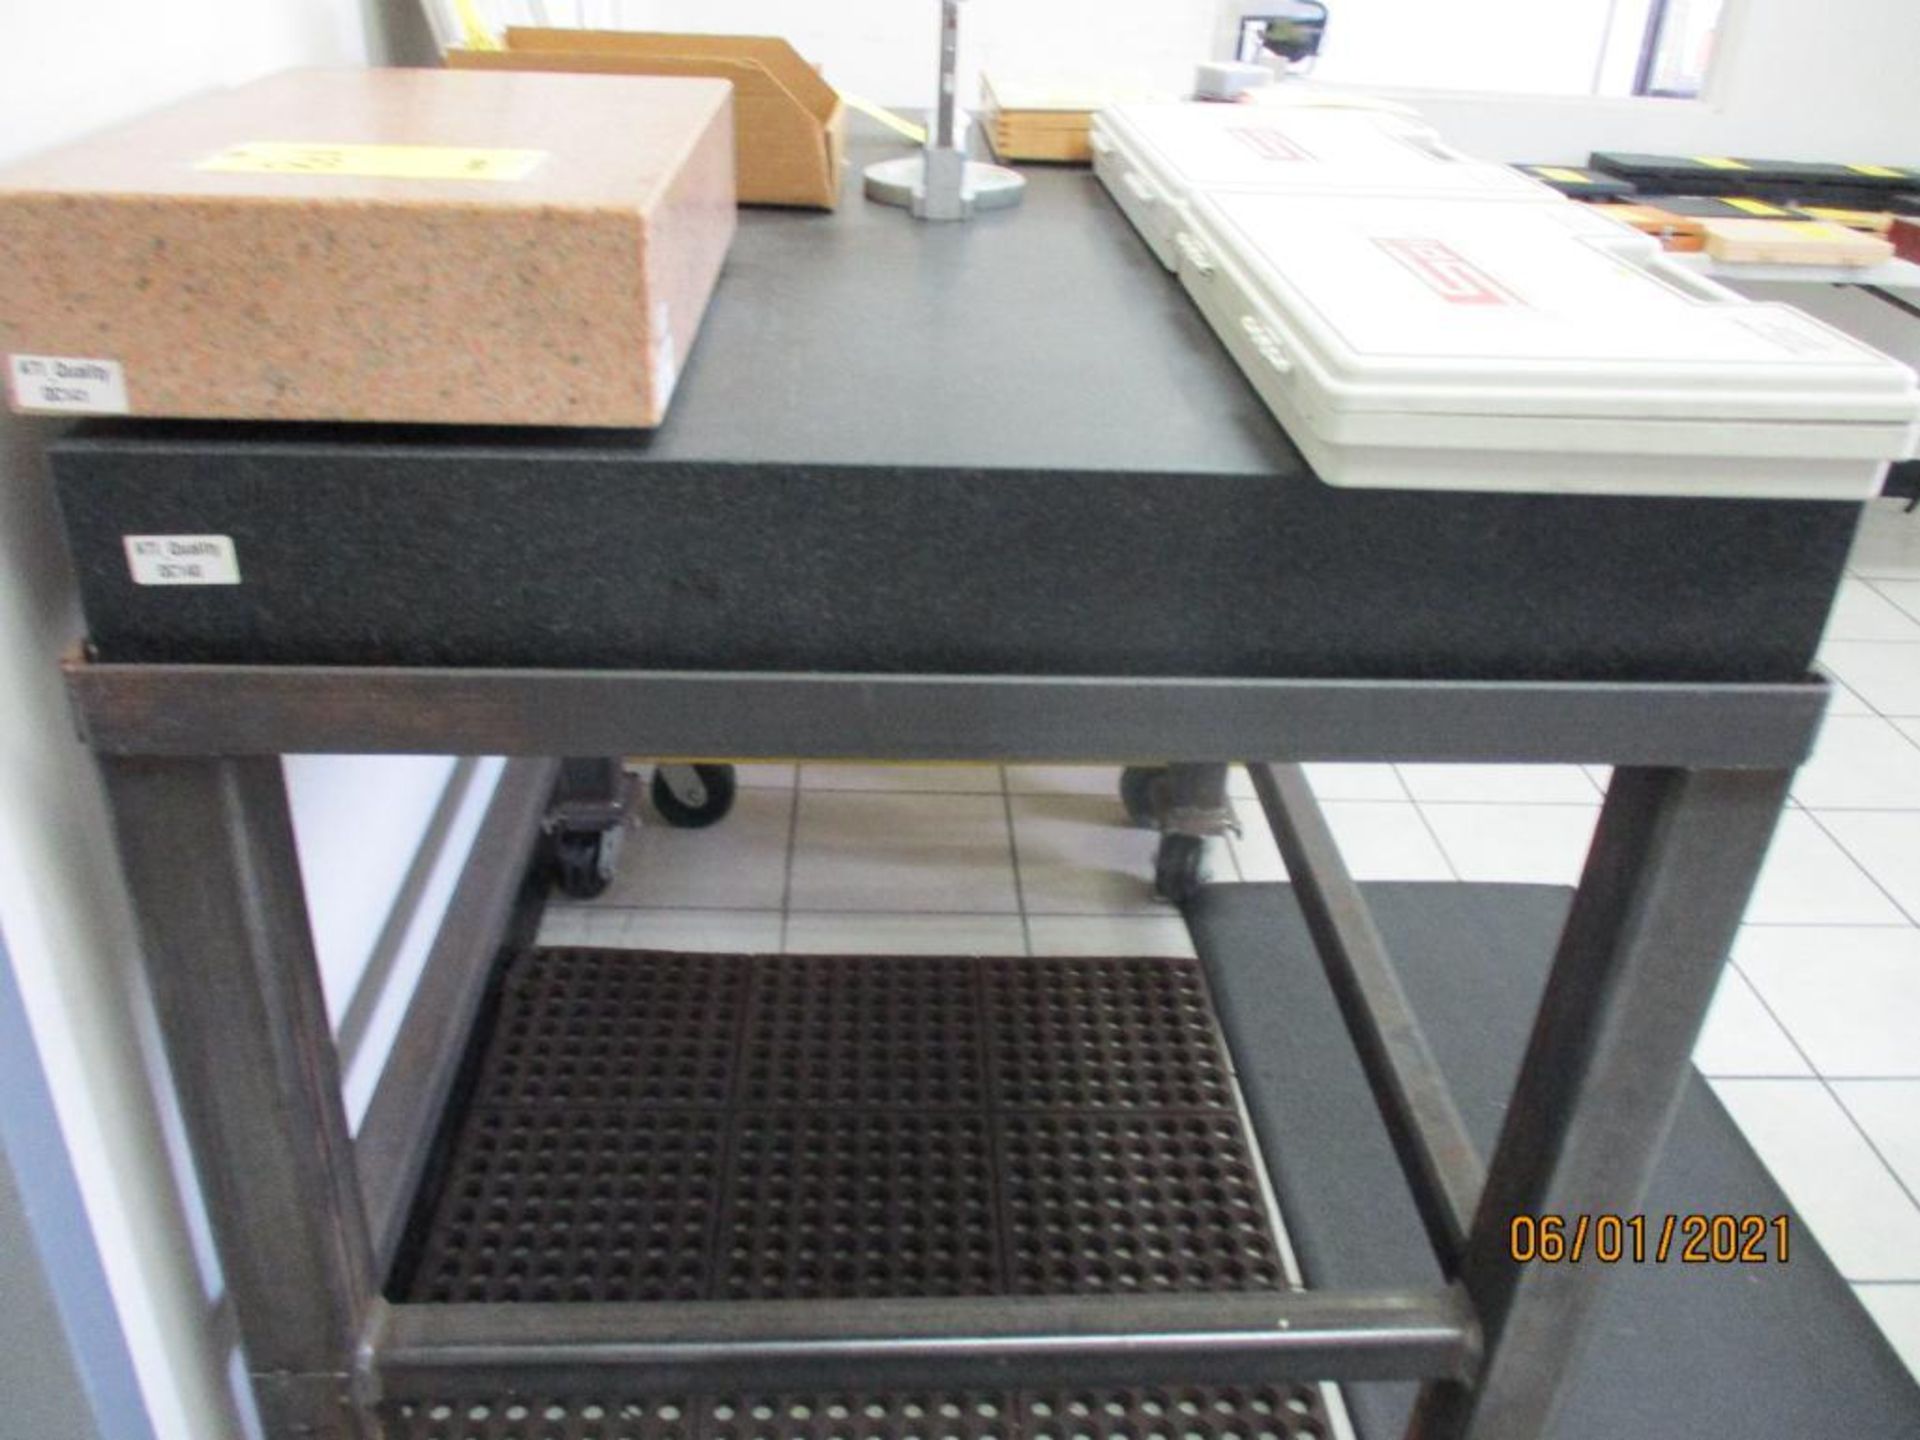 Surface Granite Plate Mounted on Steel Rolling Cart, 36 in. x 48 in. x 6 in. thick, Last Certified - Image 3 of 3